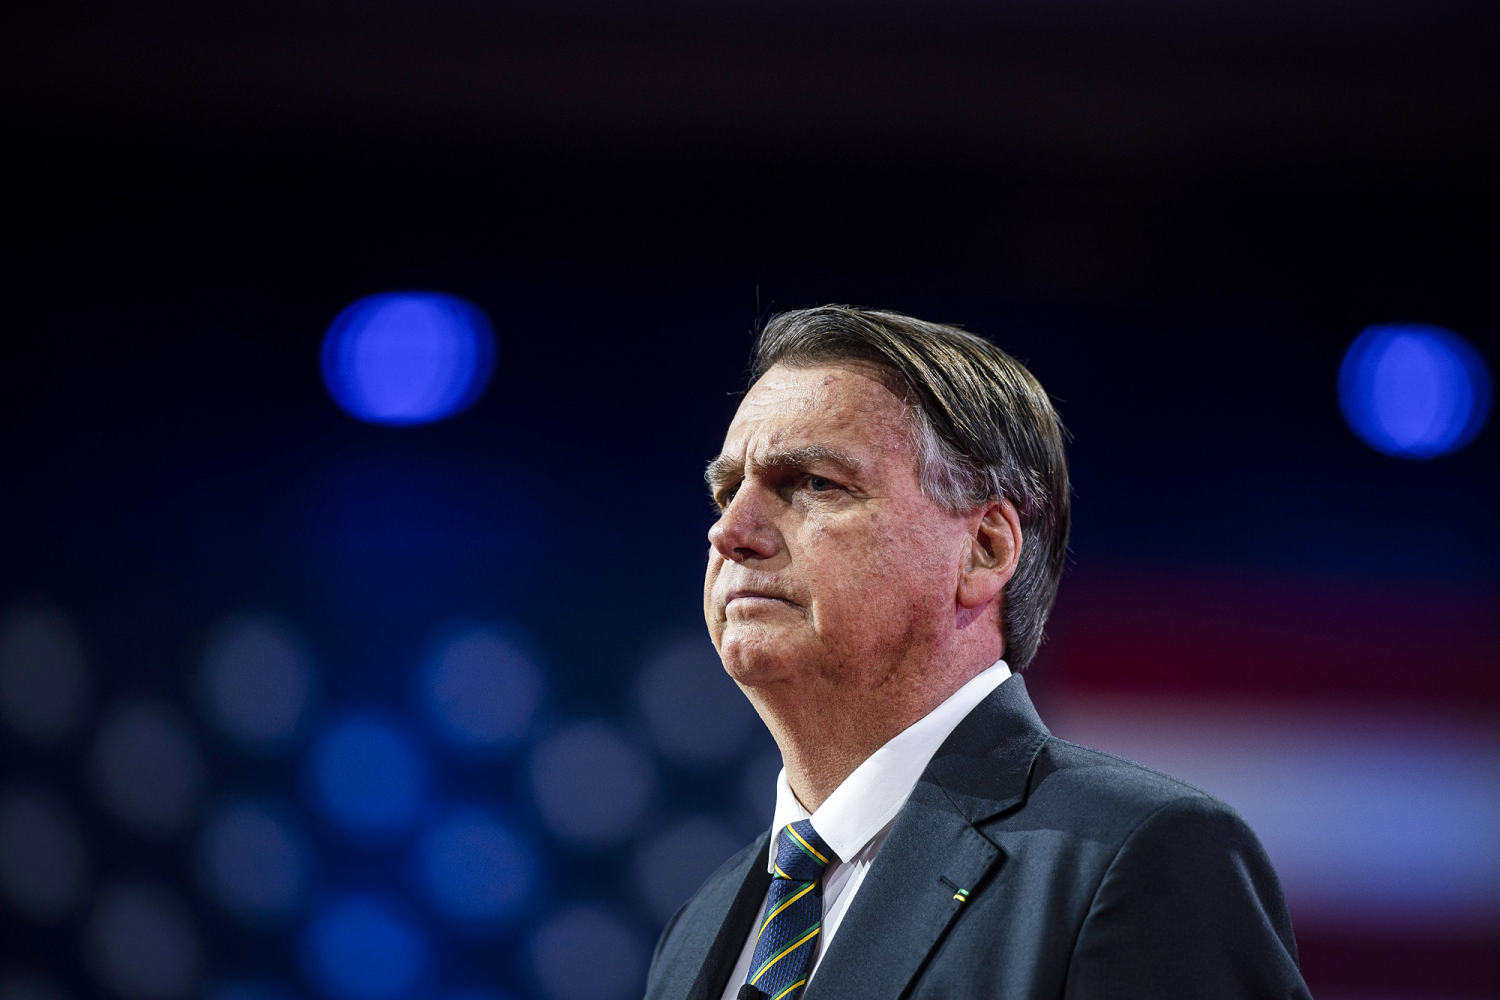 Brazil's Bolsonaro is target of several probes, but his Covid decisions catch up to him first